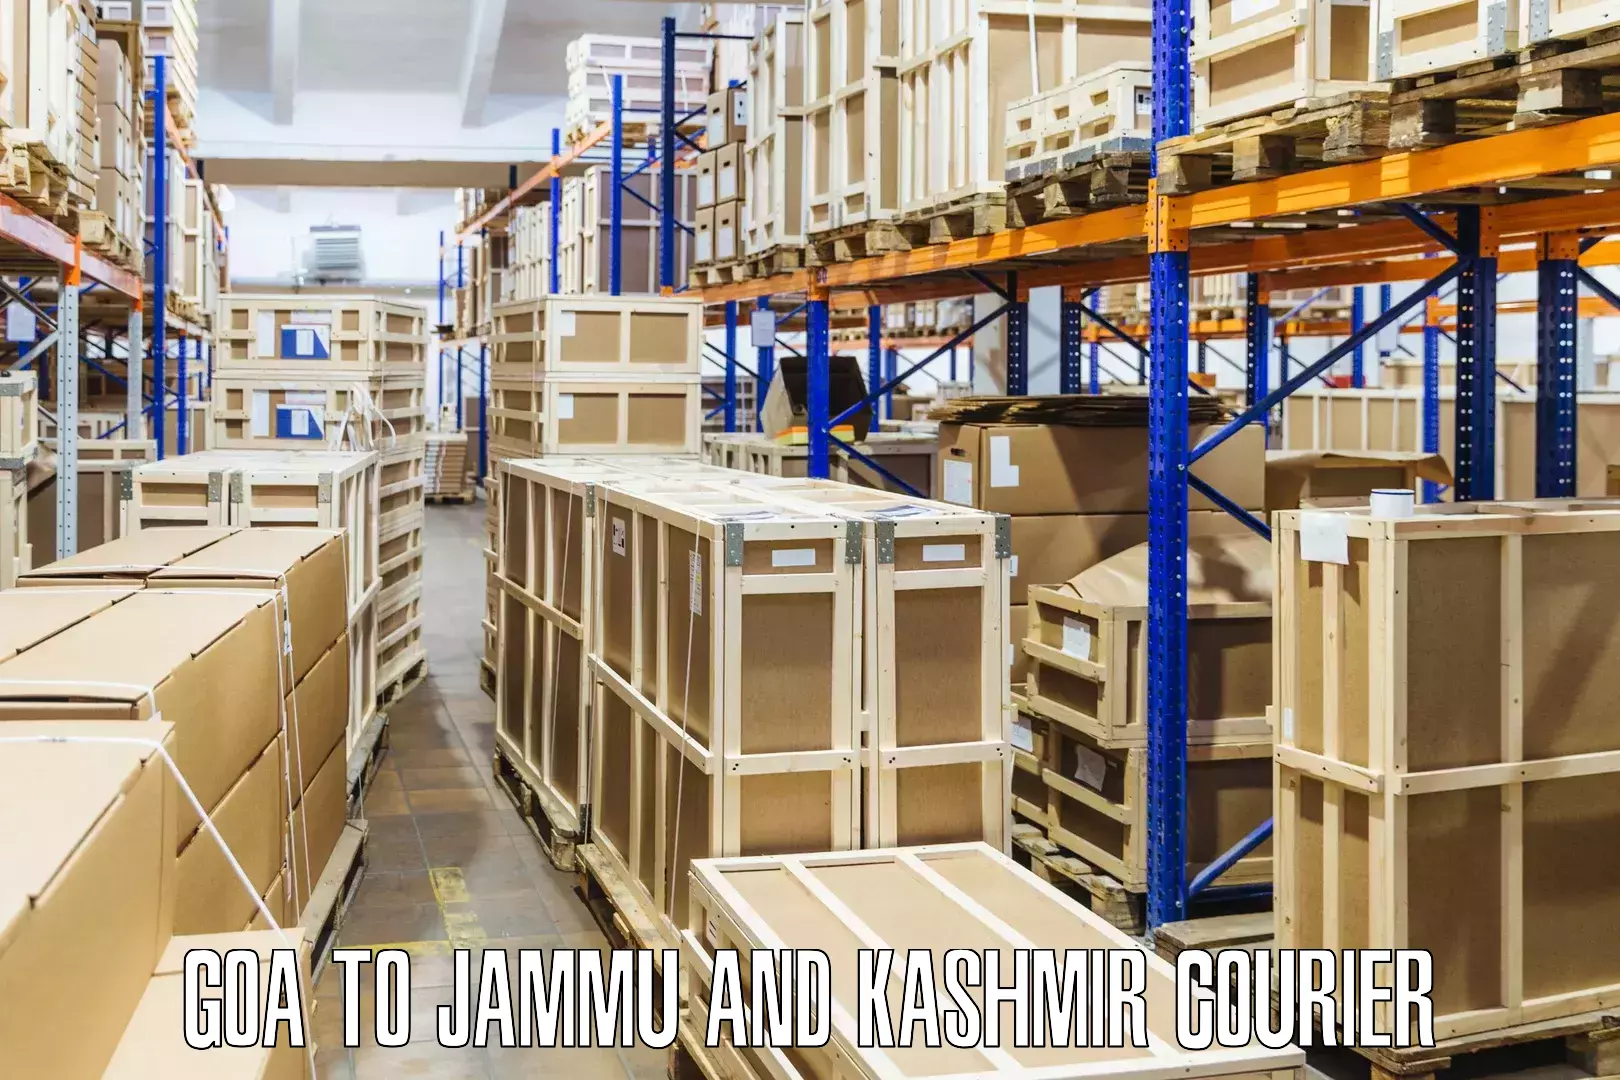 Round-the-clock parcel delivery Goa to Jammu and Kashmir